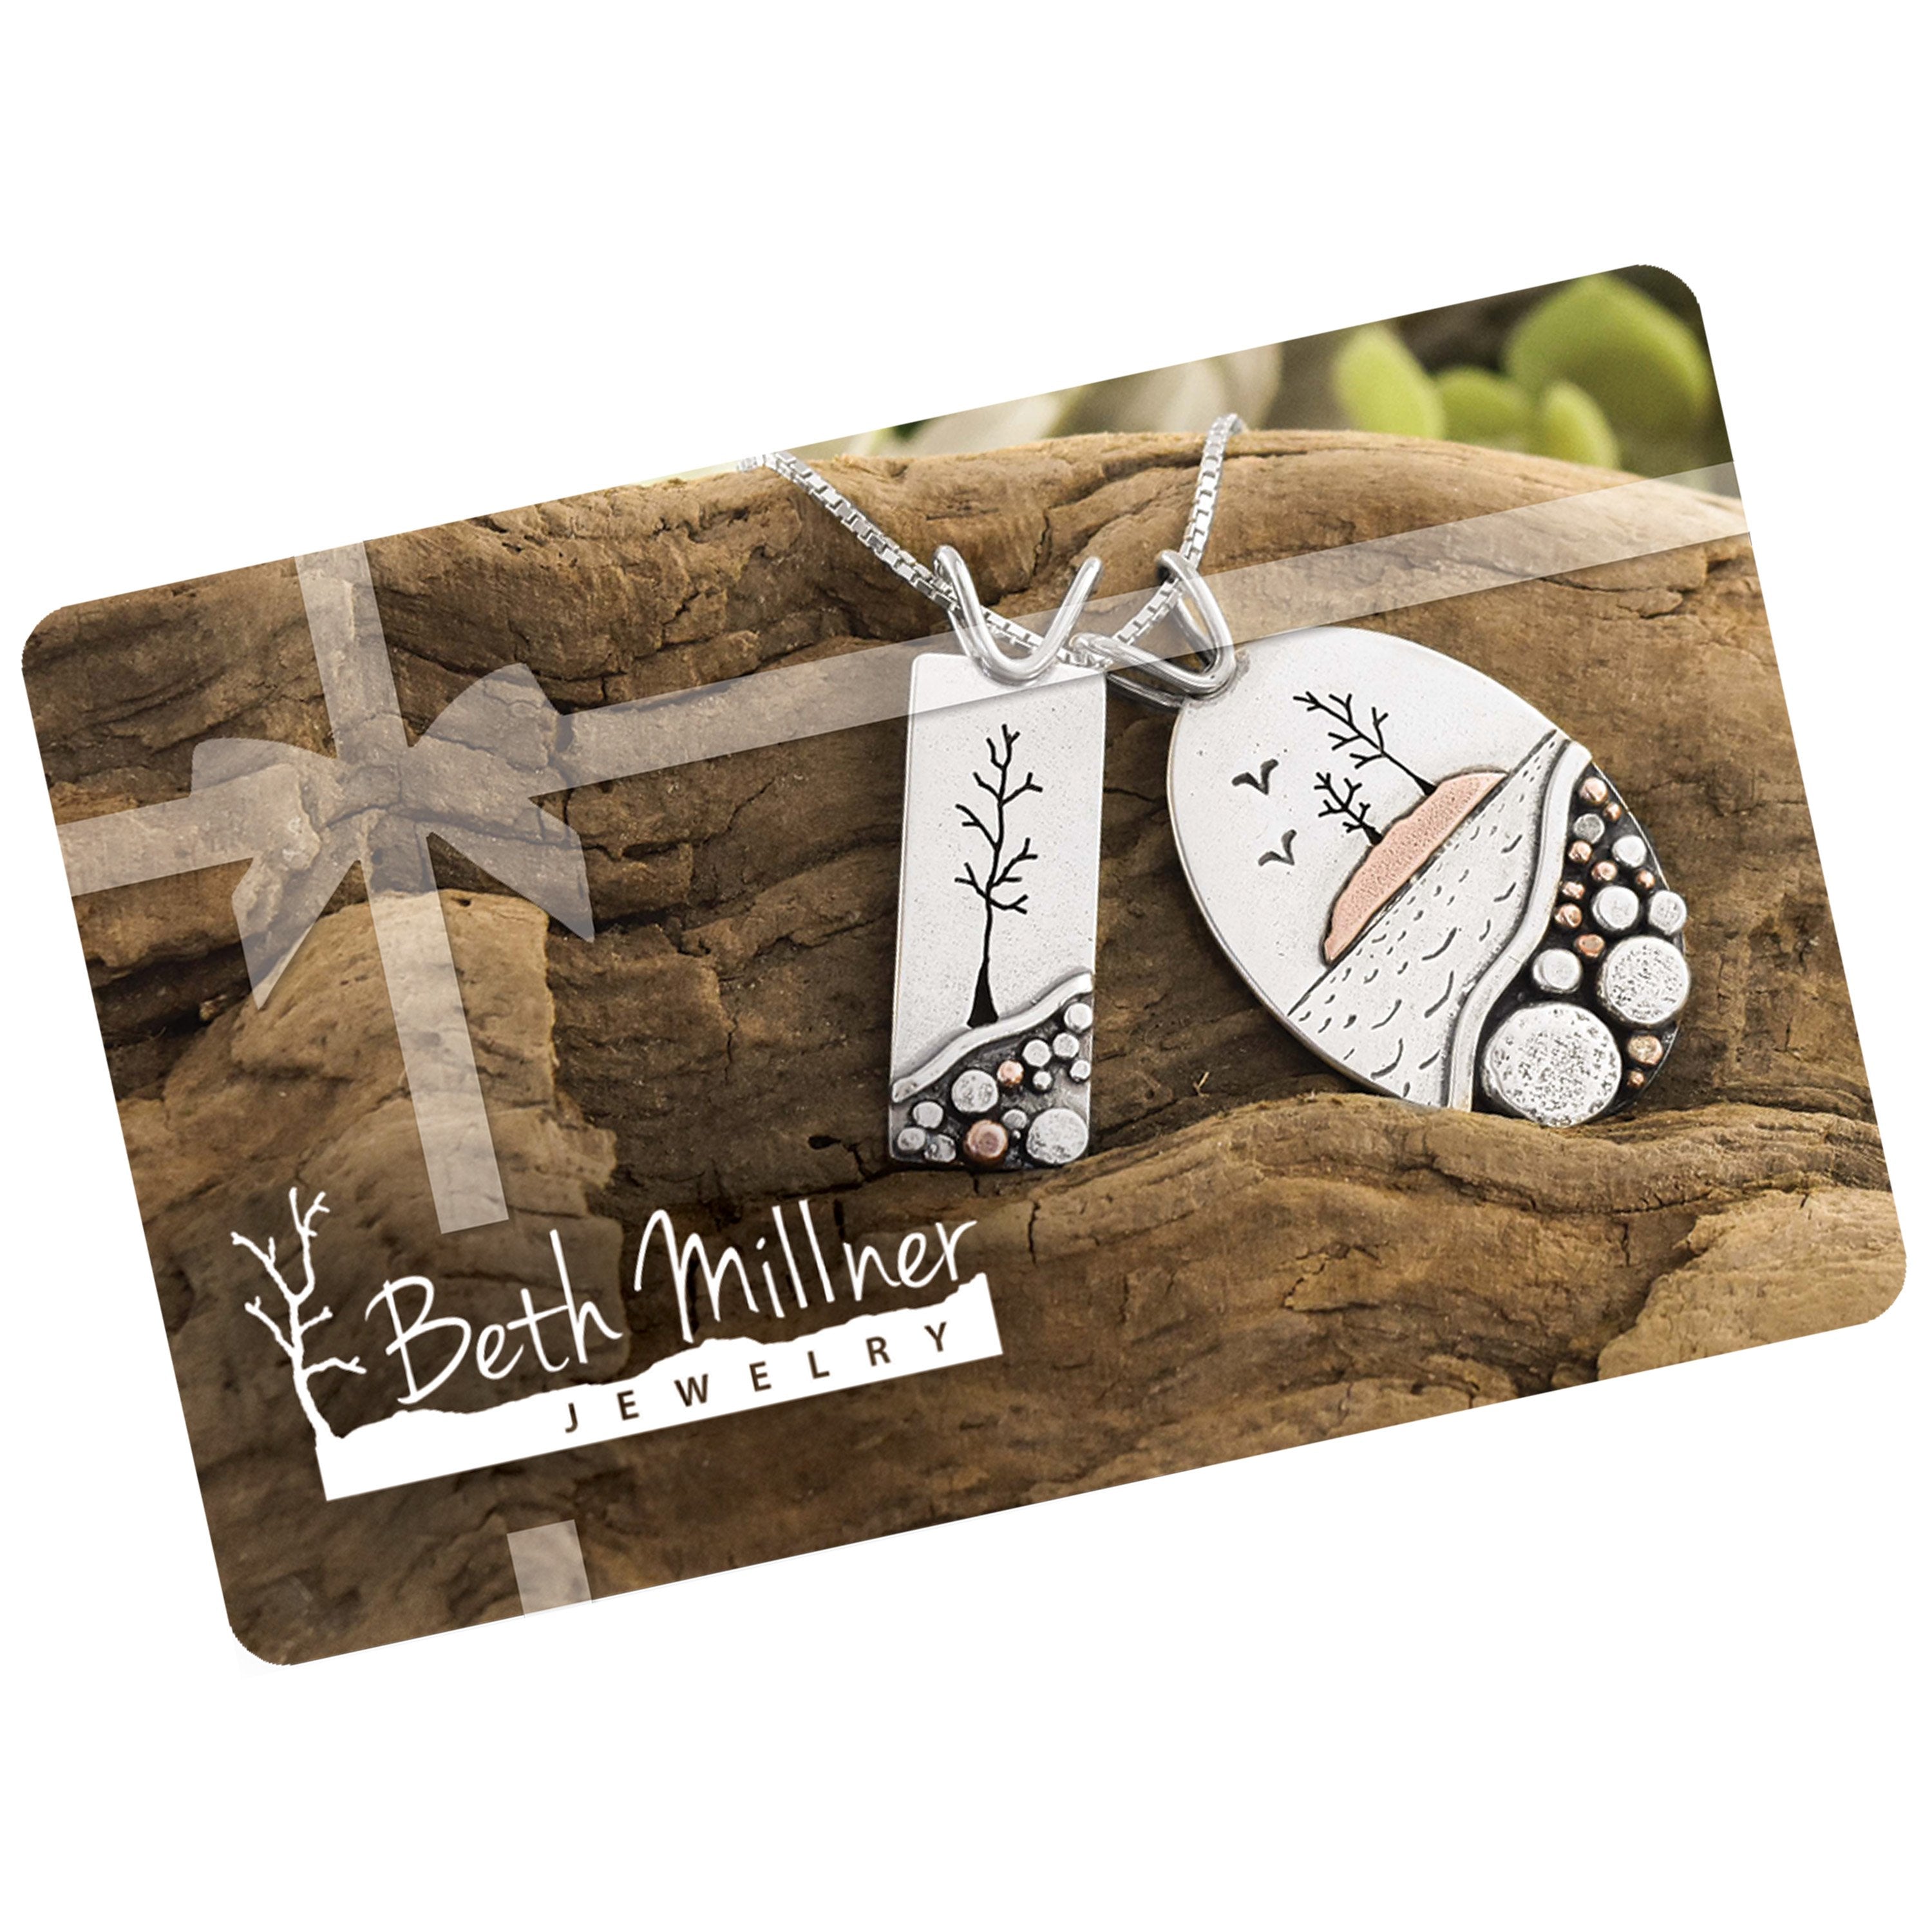 Gift Card handcrafted at Beth Millner Jewelry